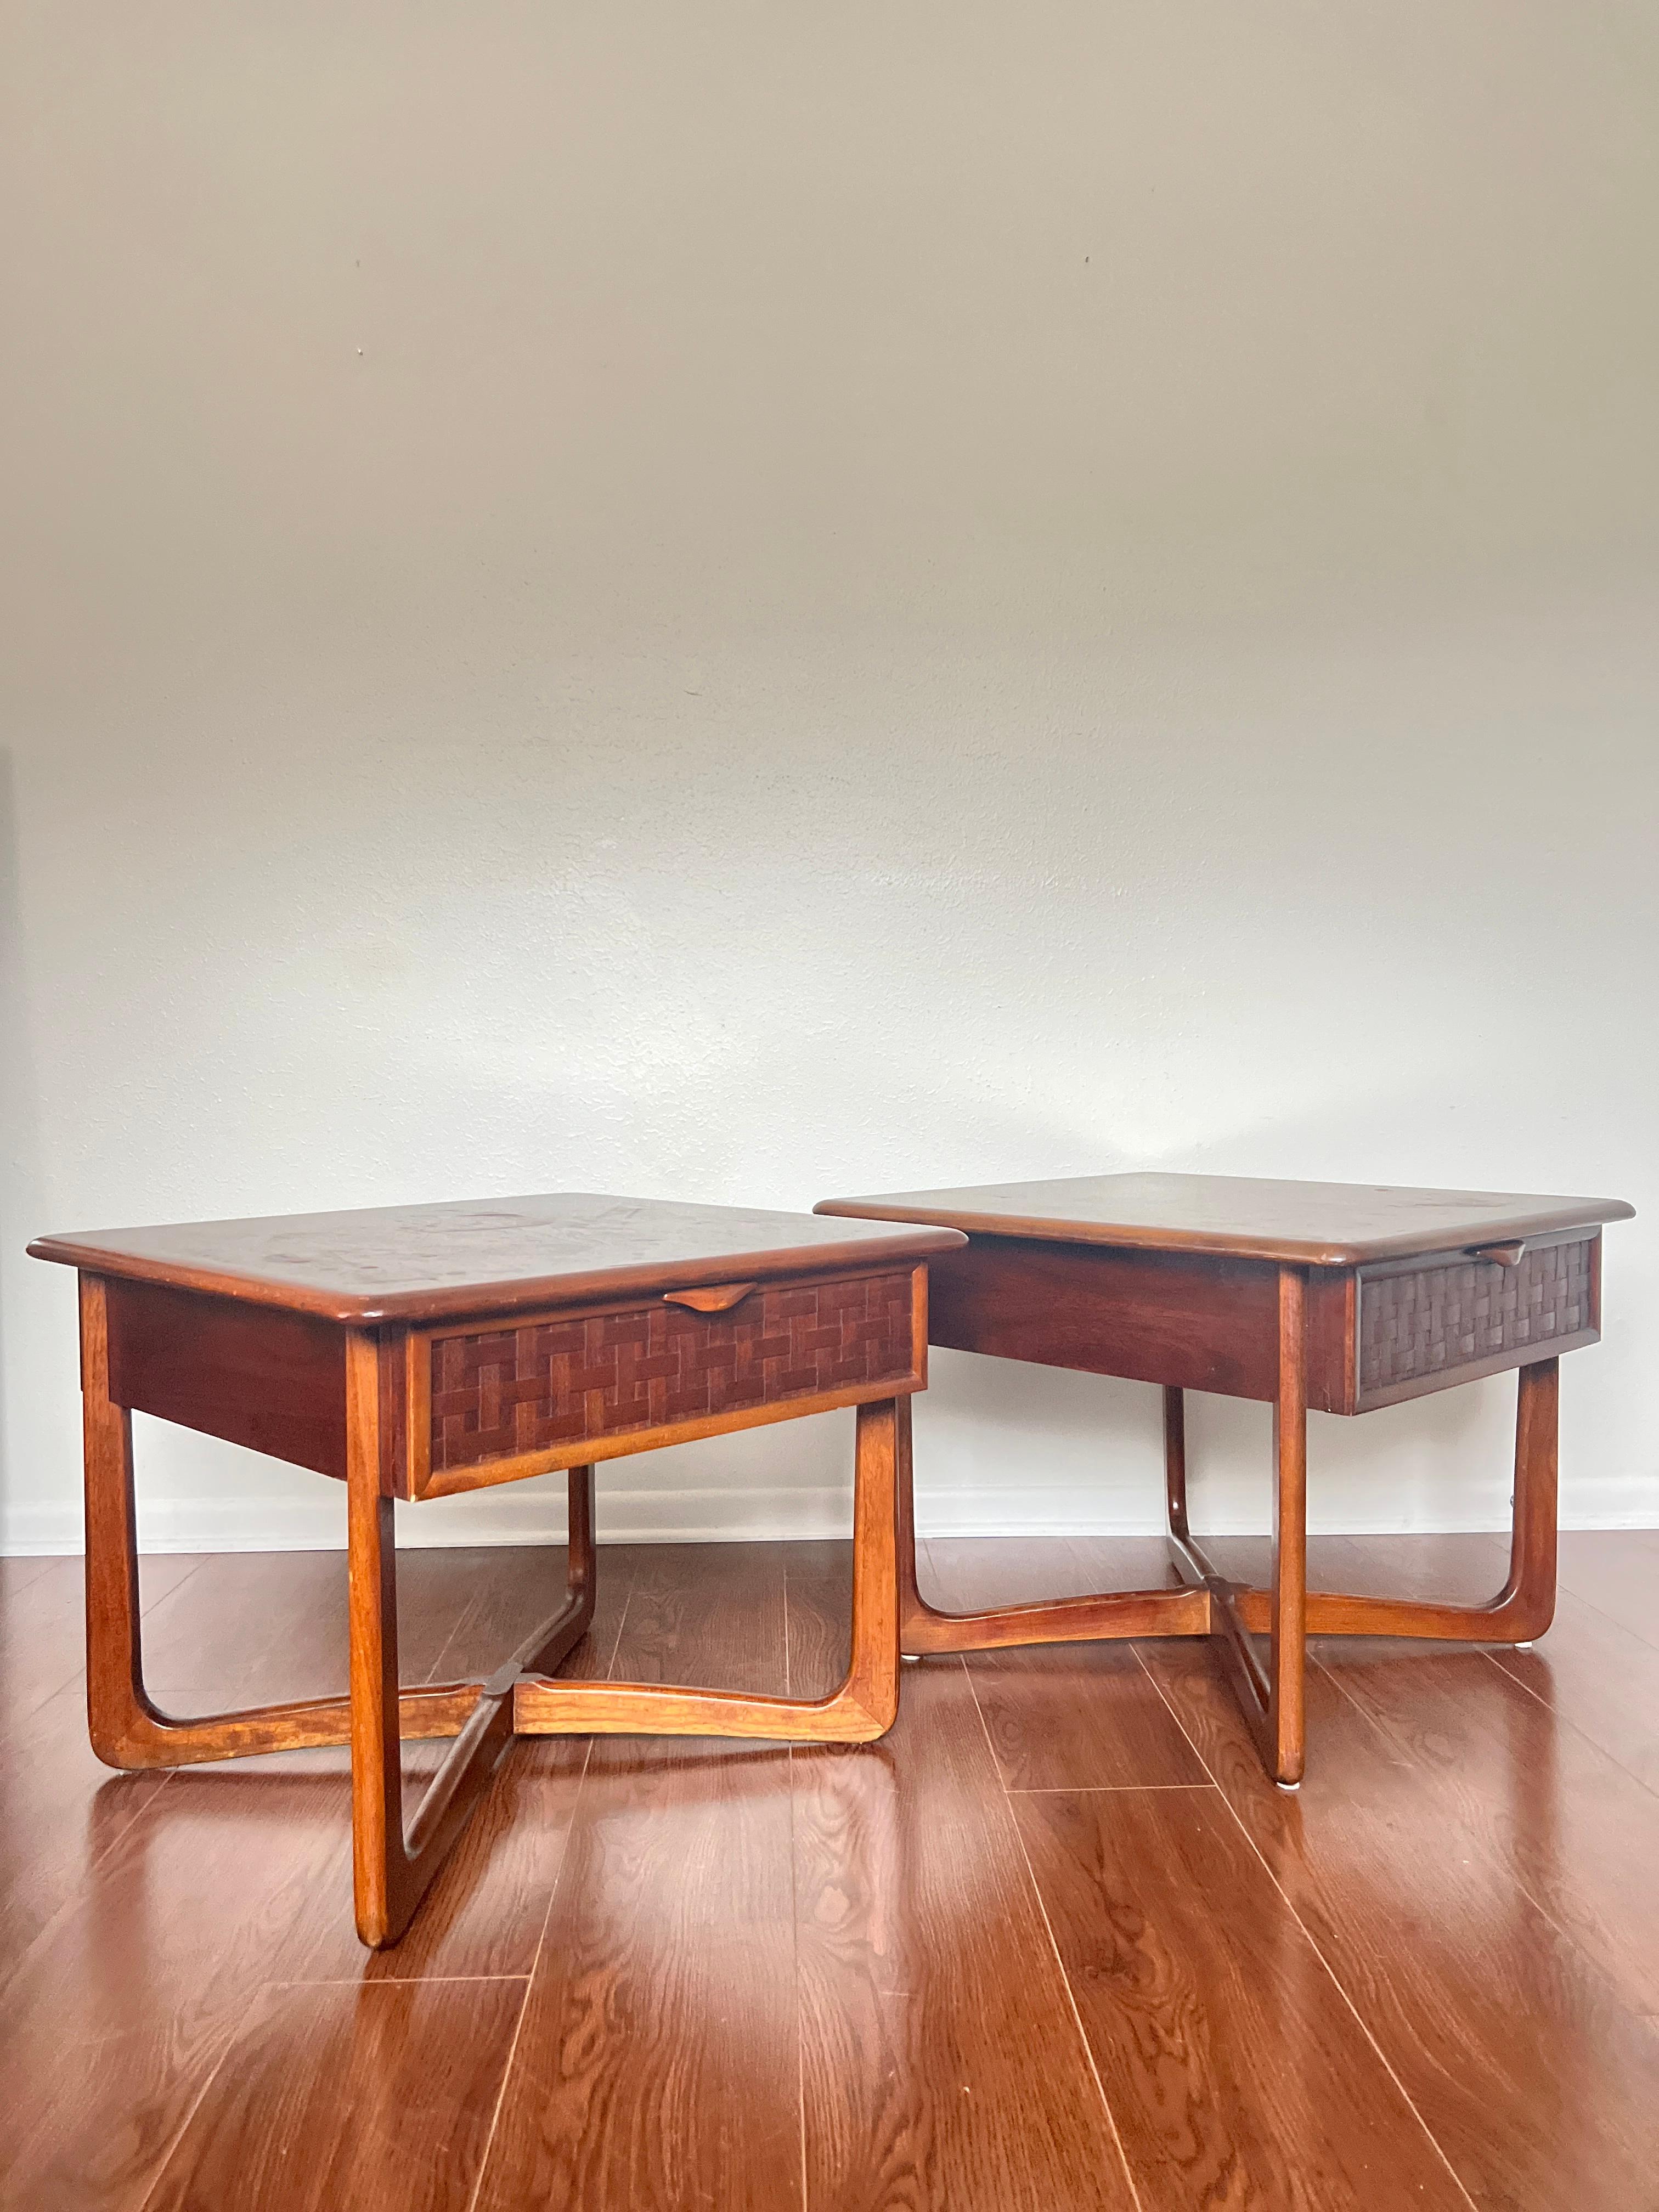 Wood Pair of Mid-Century Modern Lane Perception Side Tables with a Cross Cross Base